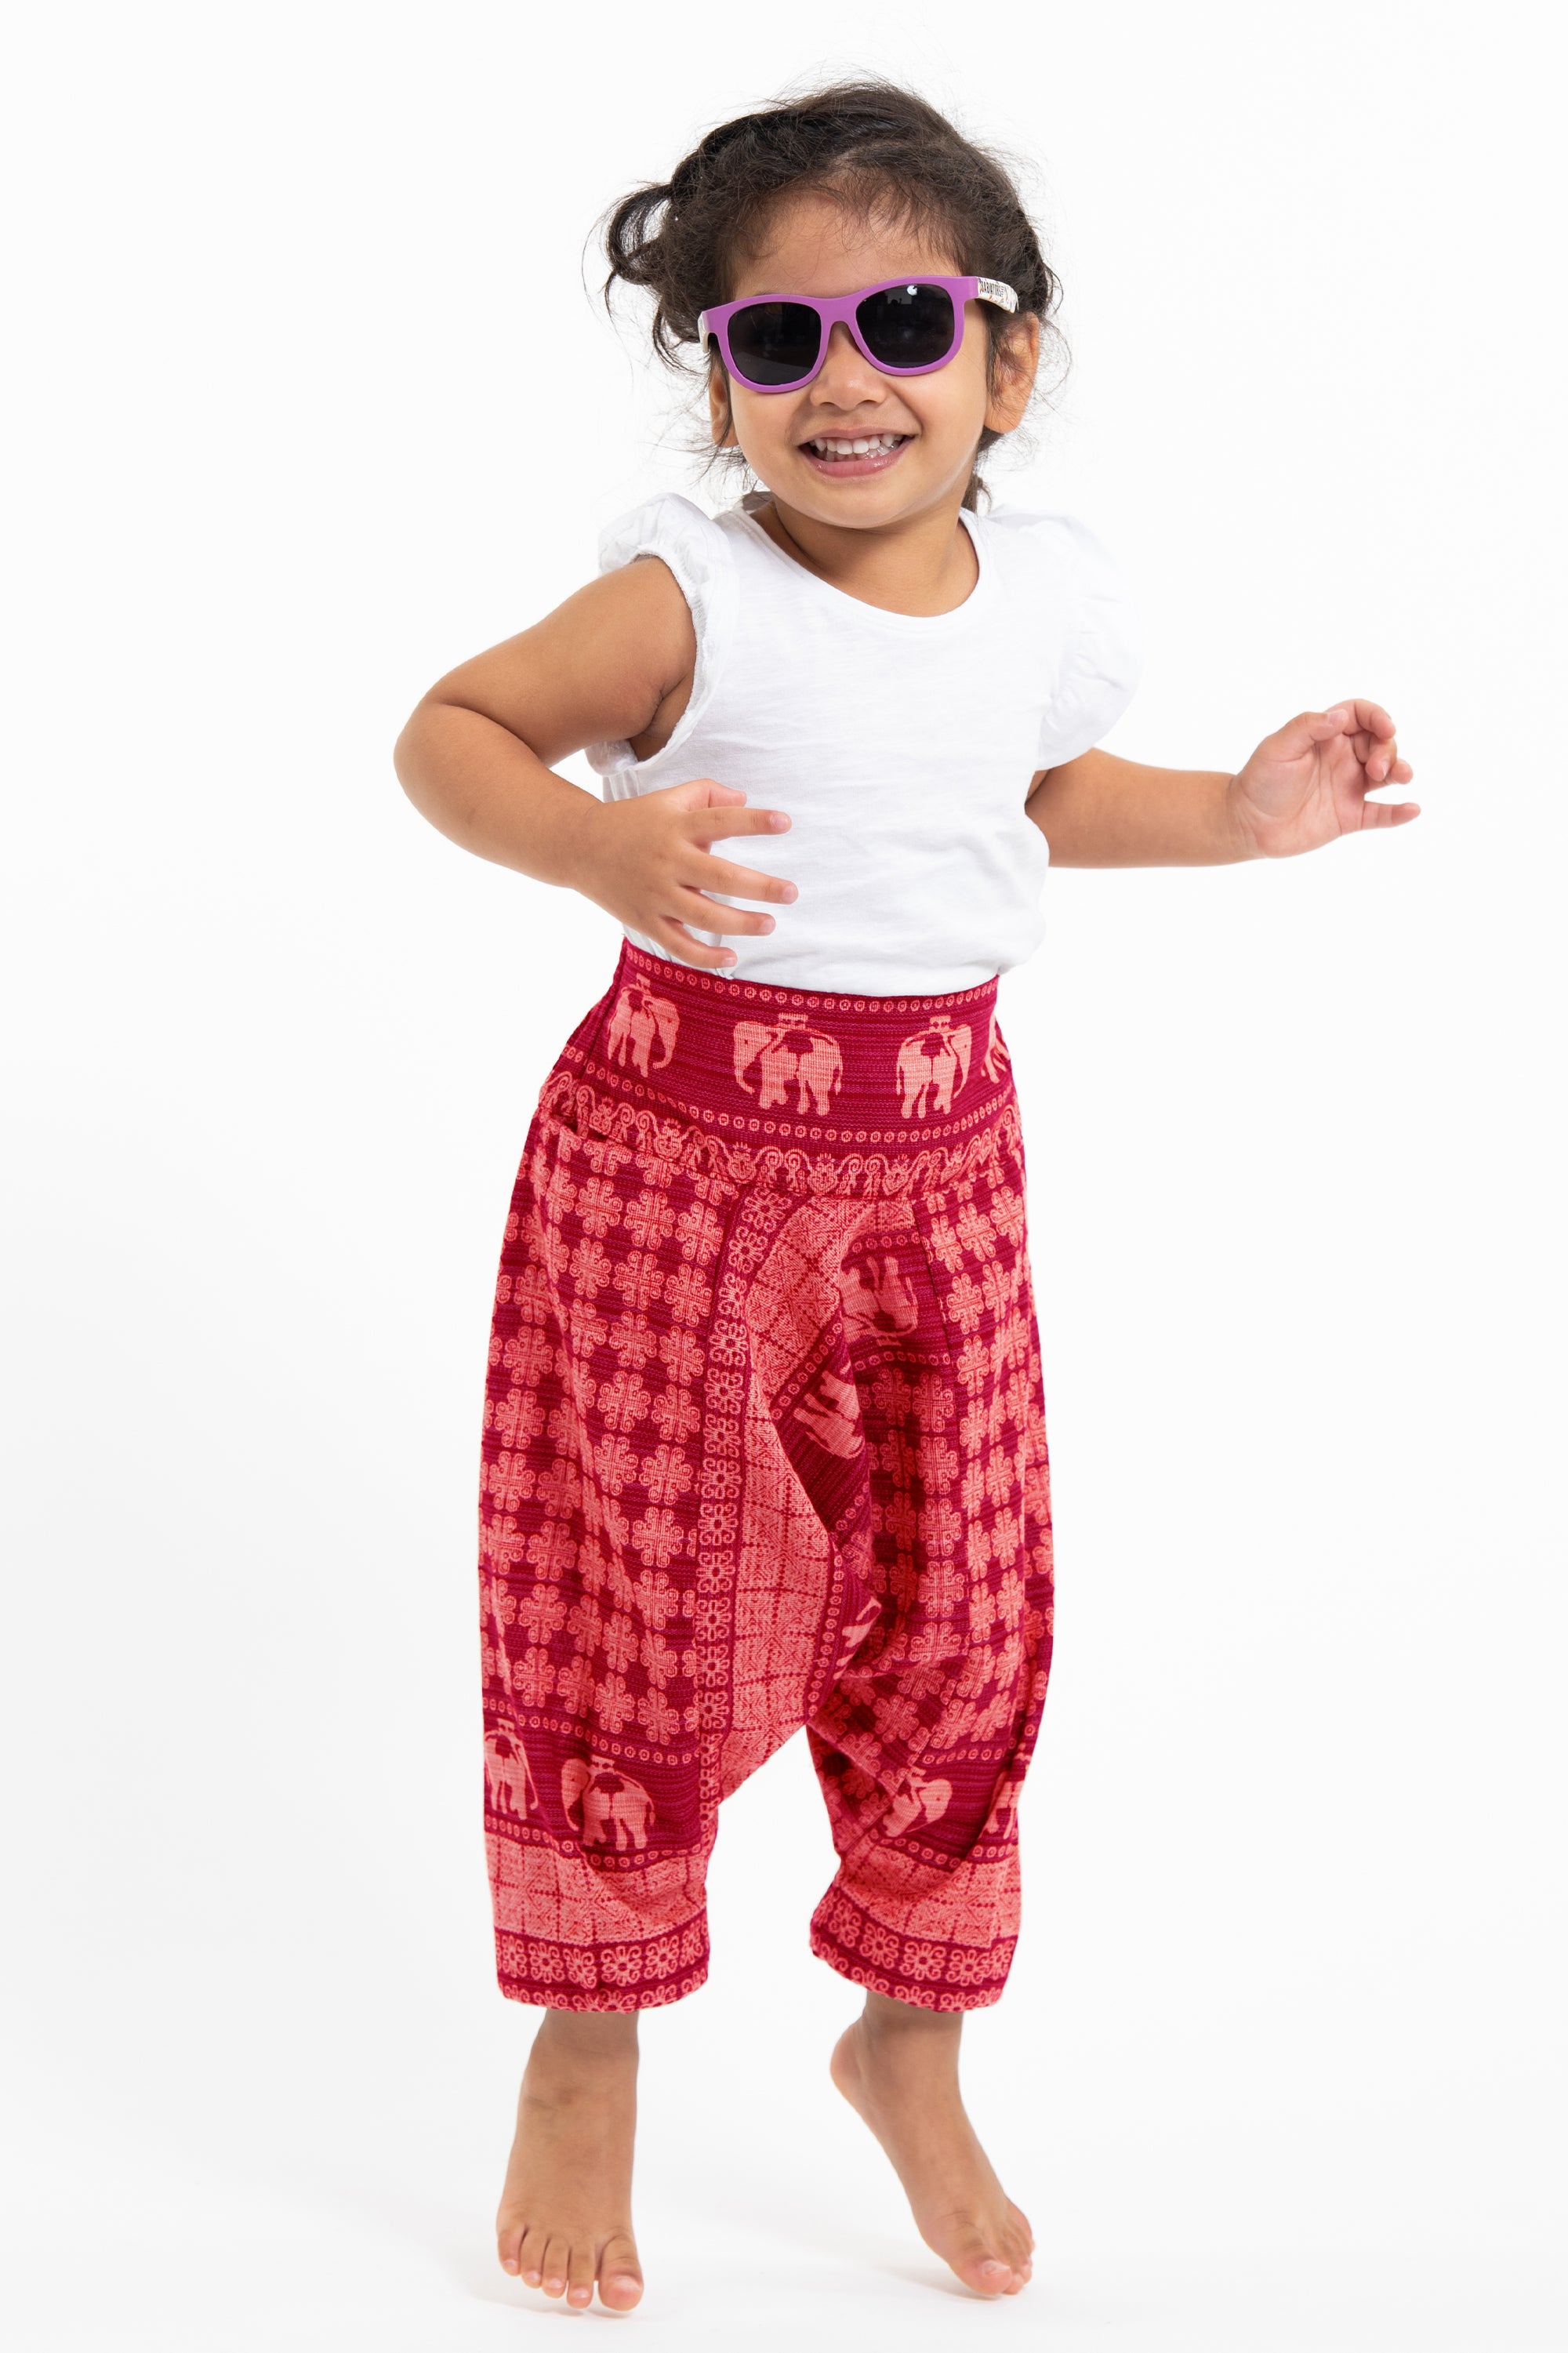 Buy Whitewhale Baby Hippy Thai Rayon Harem Aladdin Pirate Kids Bohemian  Baggy Pants White at Amazon.in